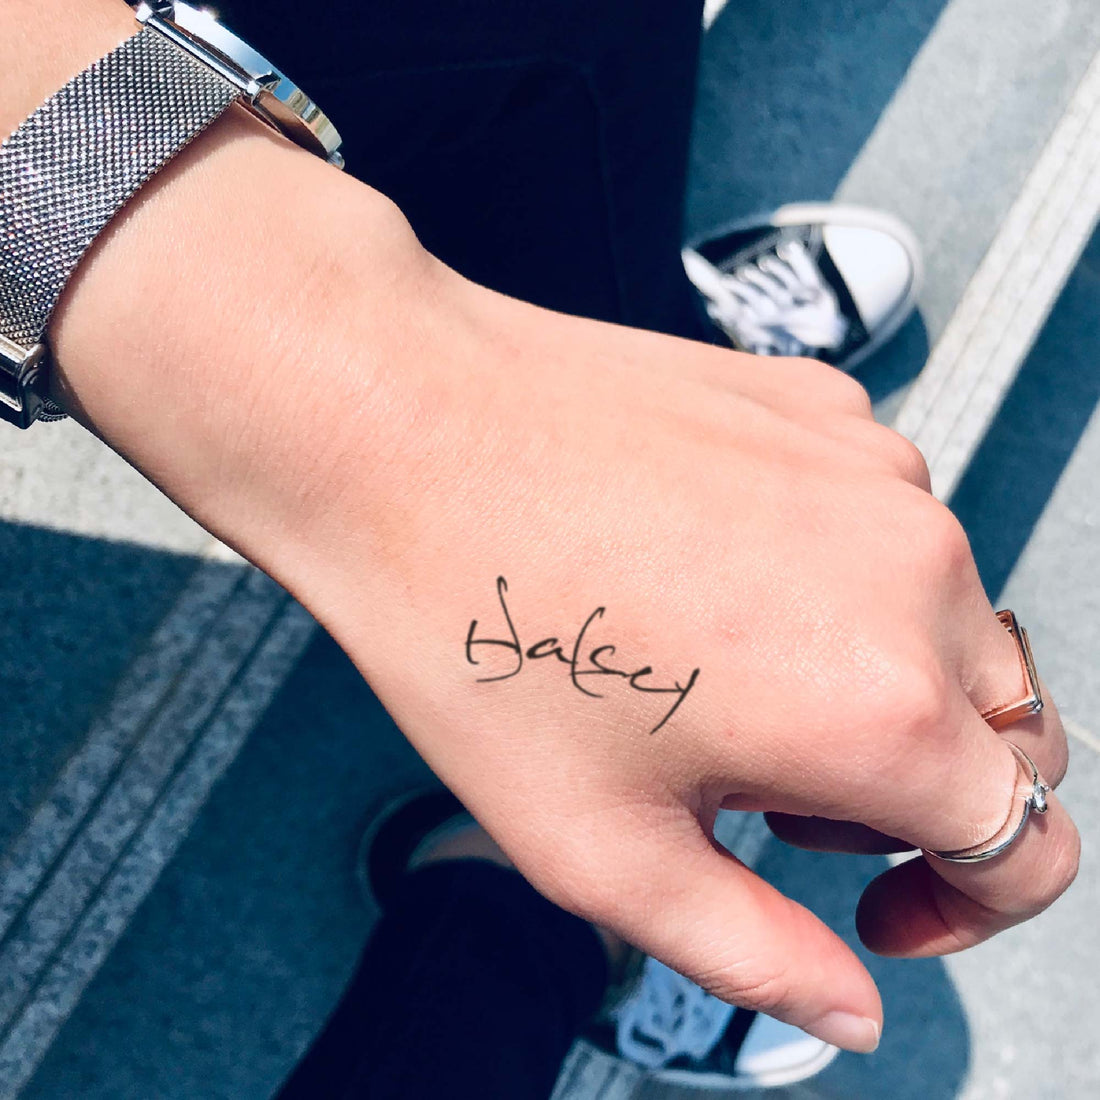 Halsey custom temporary tattoo sticker design idea inspiration meanings removal arm wrist hand words font name signature calligraphy lyrics tour concert outfits merch accessory gift souvenir costumes wear dress up code